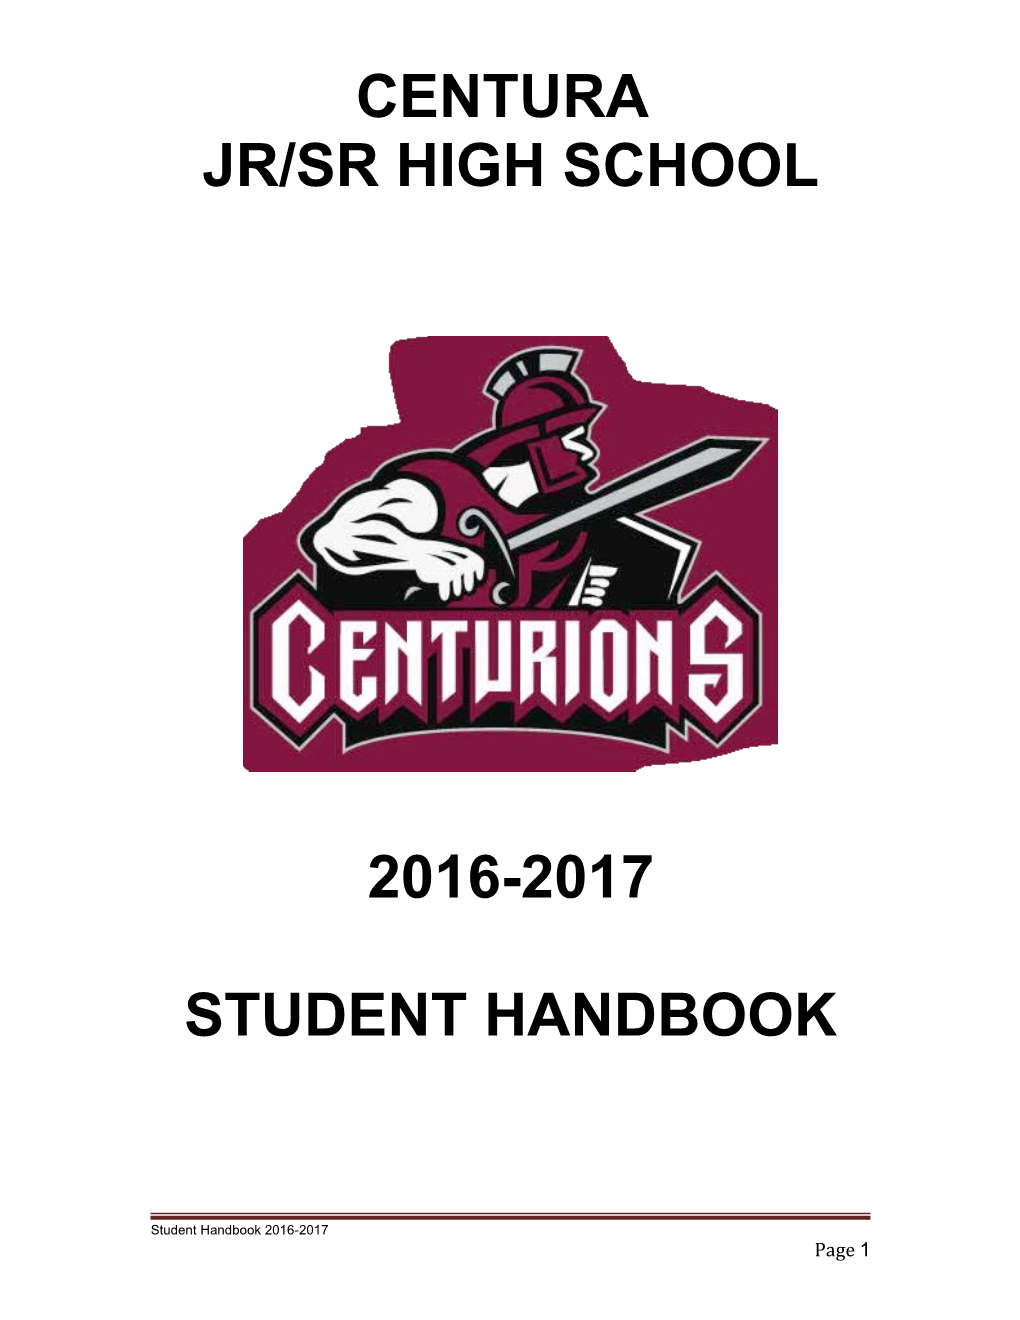 Centura Public School: a School Community About Kids, Excellence, and Innovation. 2016-2017